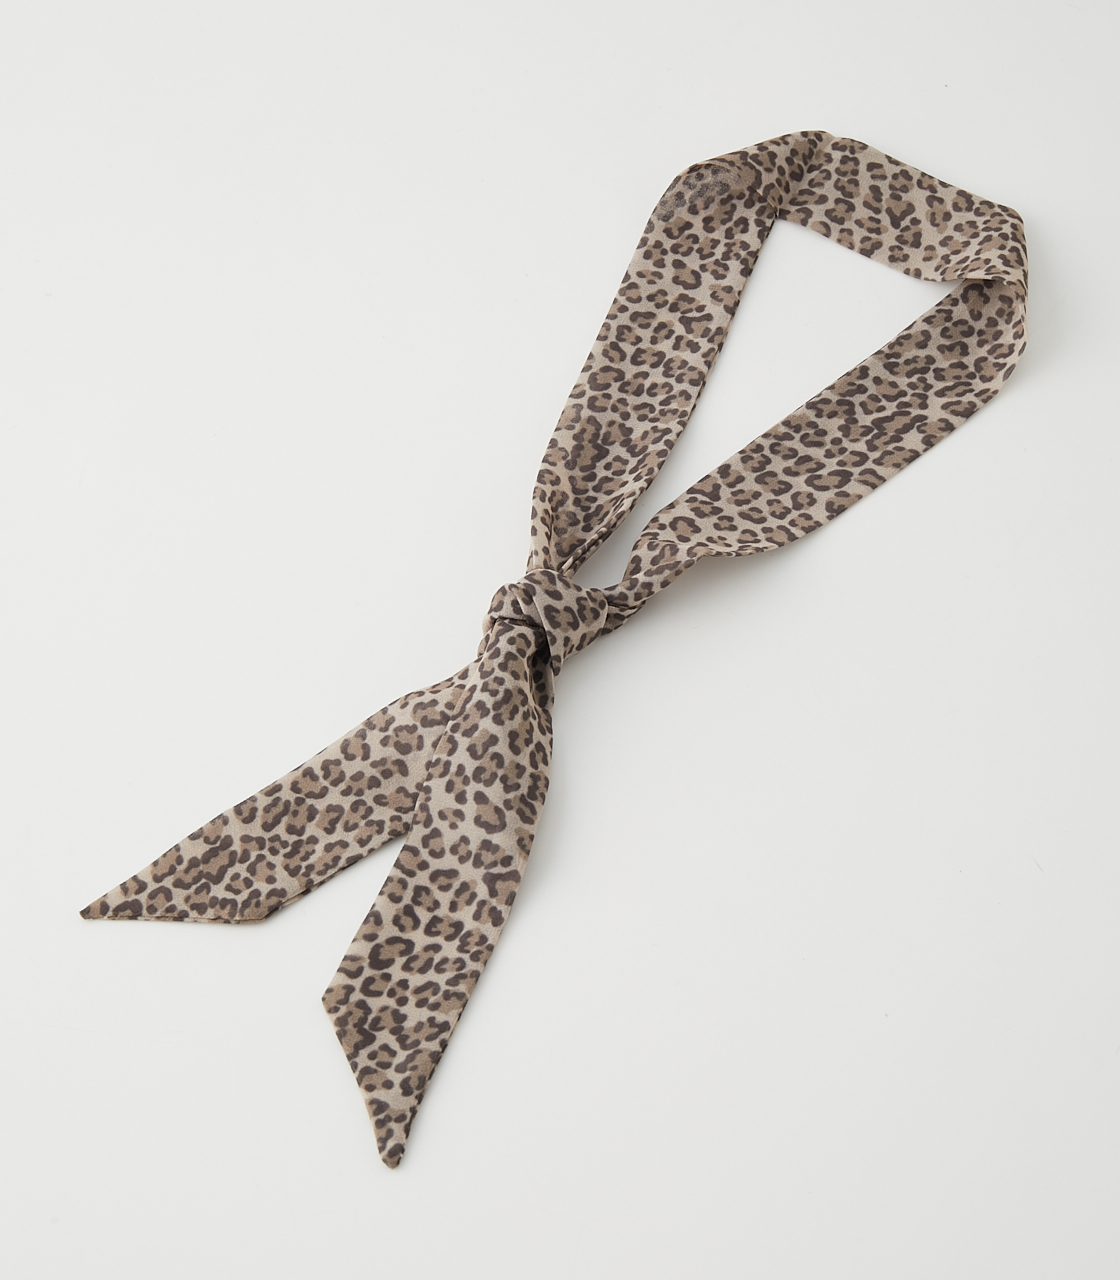 LEOPARD SCARF NECKLACE/レオパードスカーフネックレス 詳細画像 柄BEG 6